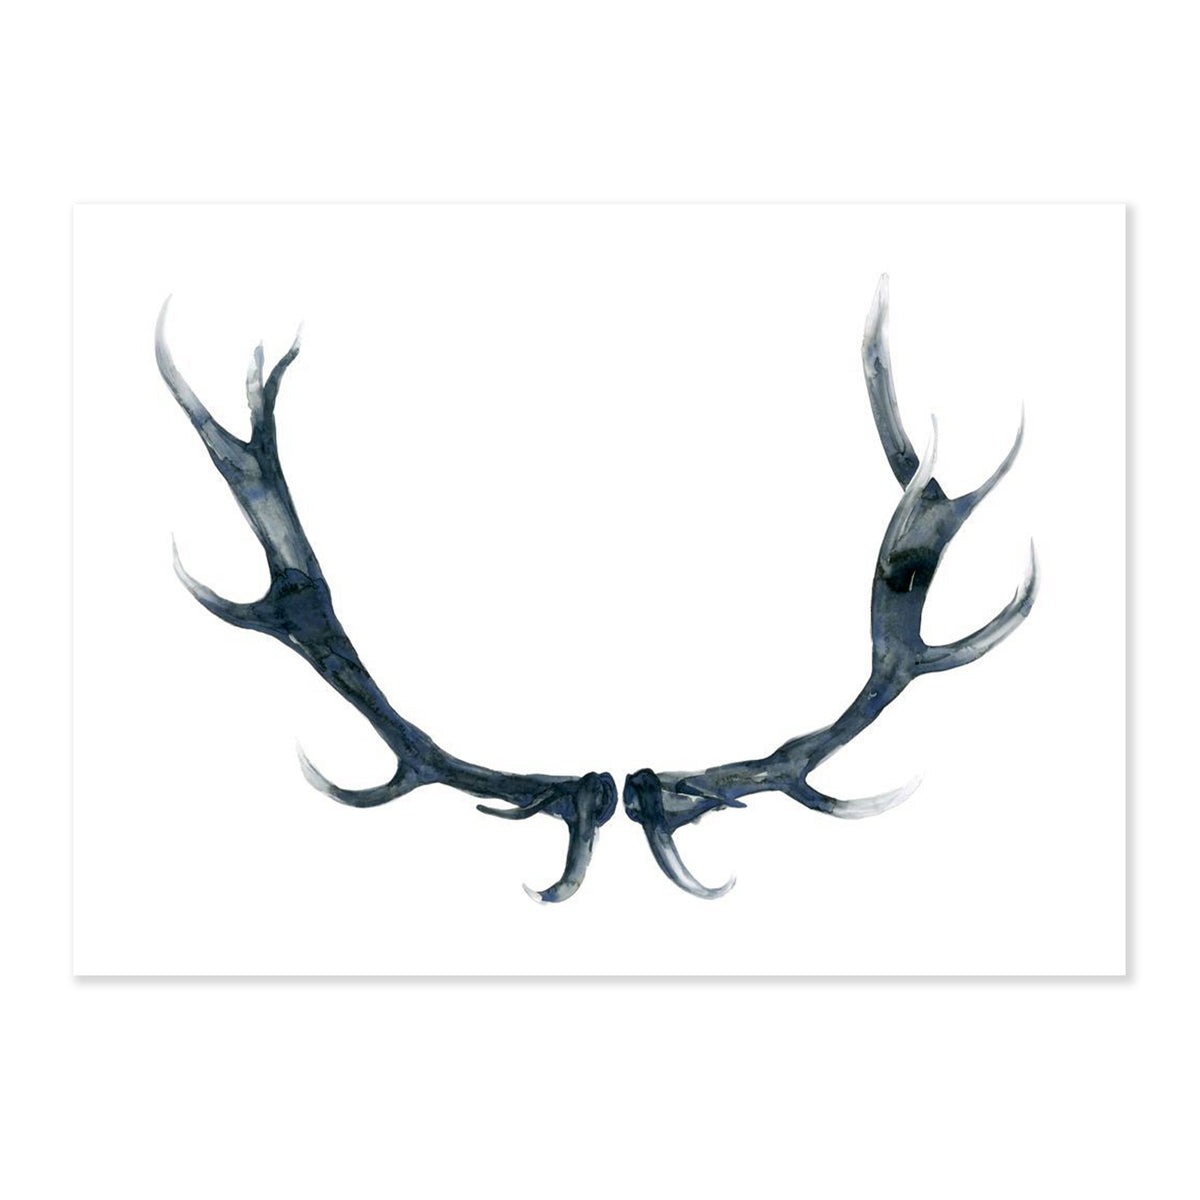 a fine art print illustrating giant antlers in black watercolor on a soft white background